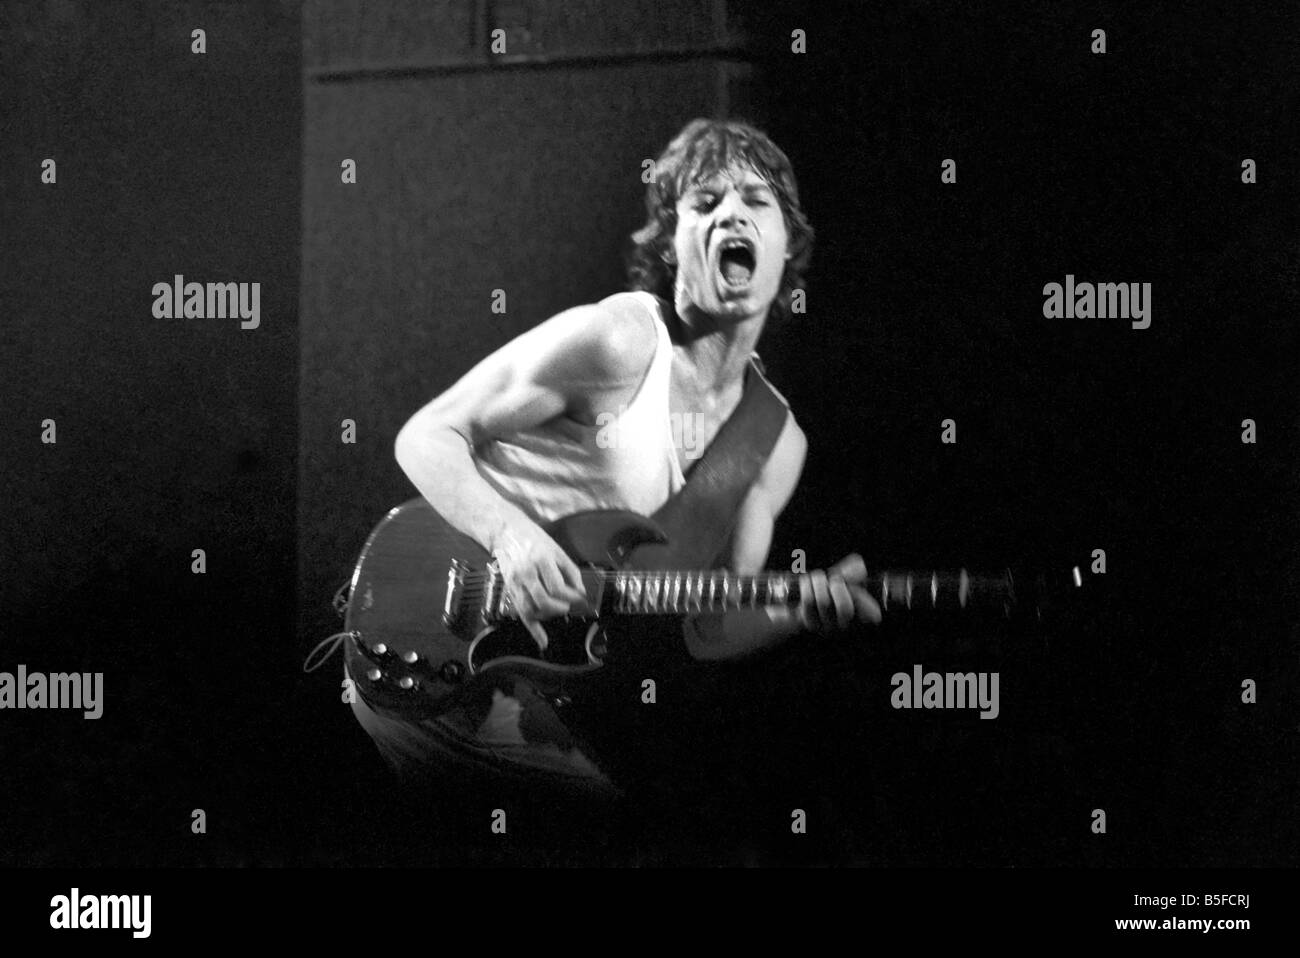 Rolling Stones Concert. European Tour. Mick Jagger very much back in  business during the Stones concert in Aberdeen. May 1982 Stock Photo - Alamy